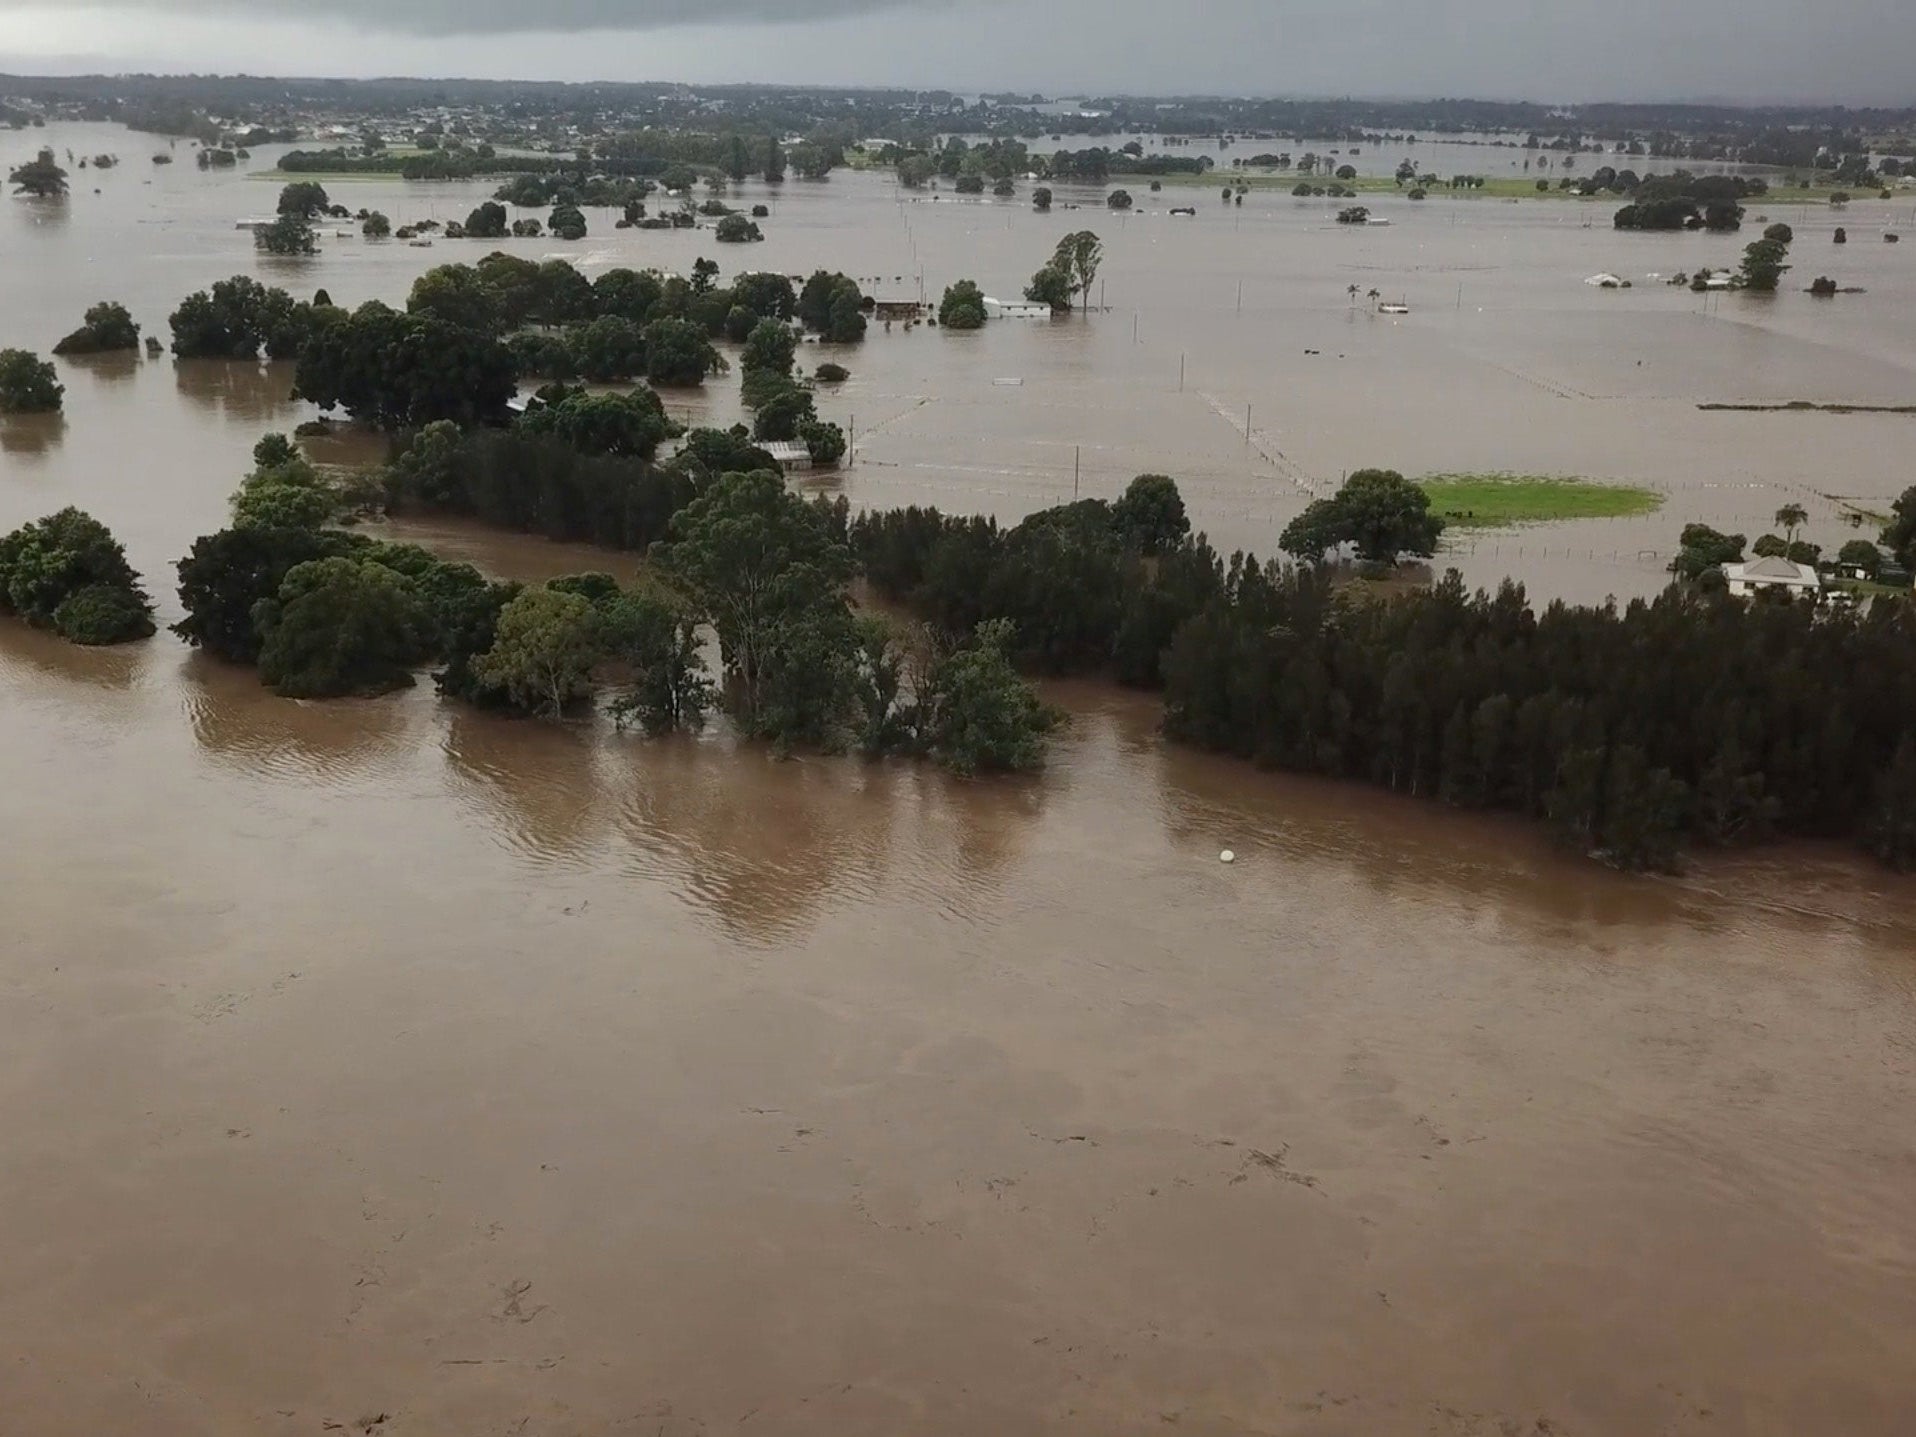 Heavy flooding has hit many parts of New South Wales with fresh downpours on the way